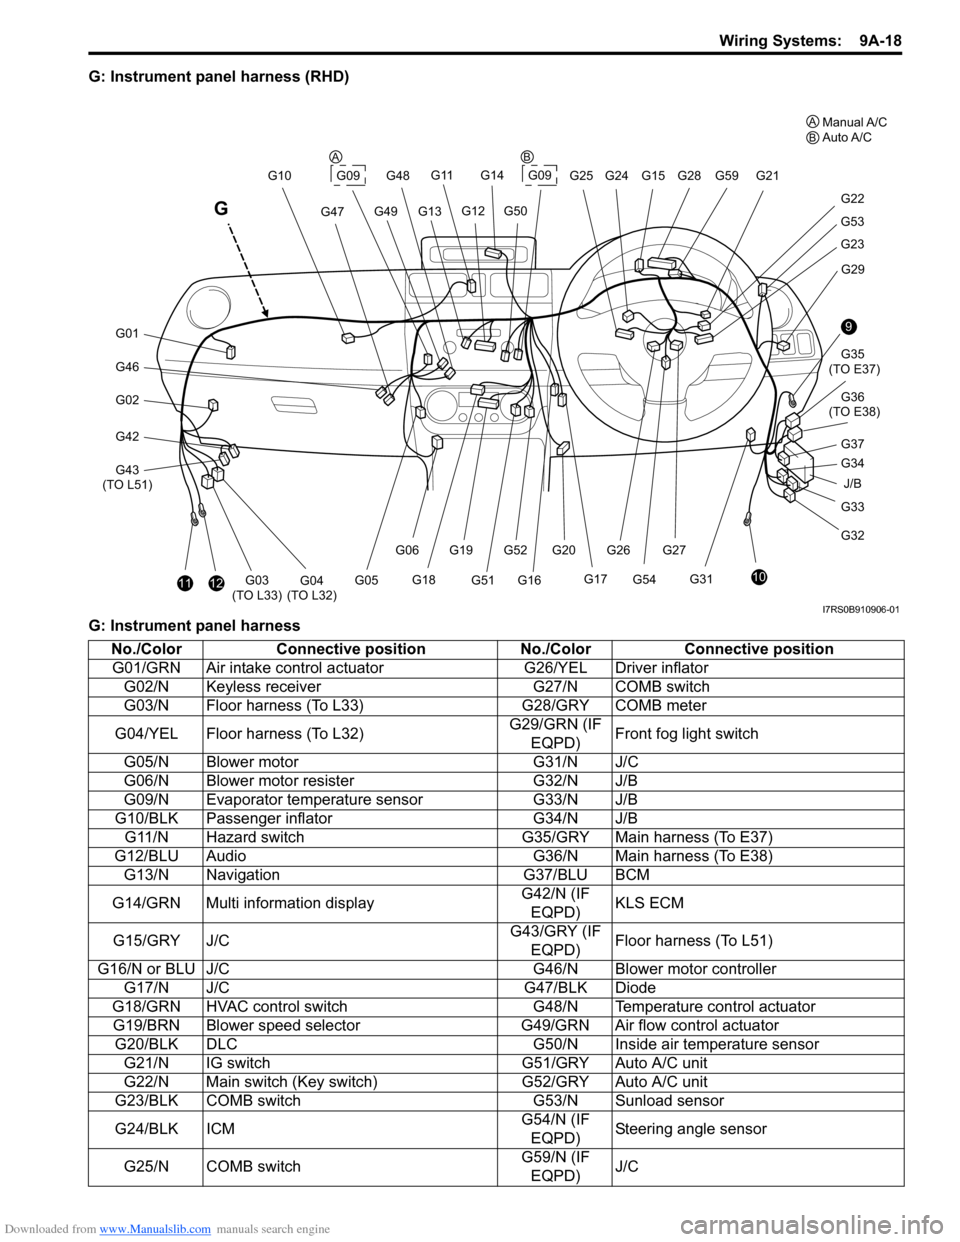 SUZUKI SWIFT 2007 2.G Service Manual Online Downloaded from www.Manualslib.com manuals search engine Wiring Systems:  9A-18
G: Instrument panel harness (RHD)
G: Instrument panel harness
J/B
9
10
G33
G32 G34 G35
 (TO E37)
G36
 (TO E38)
G31 G29
G